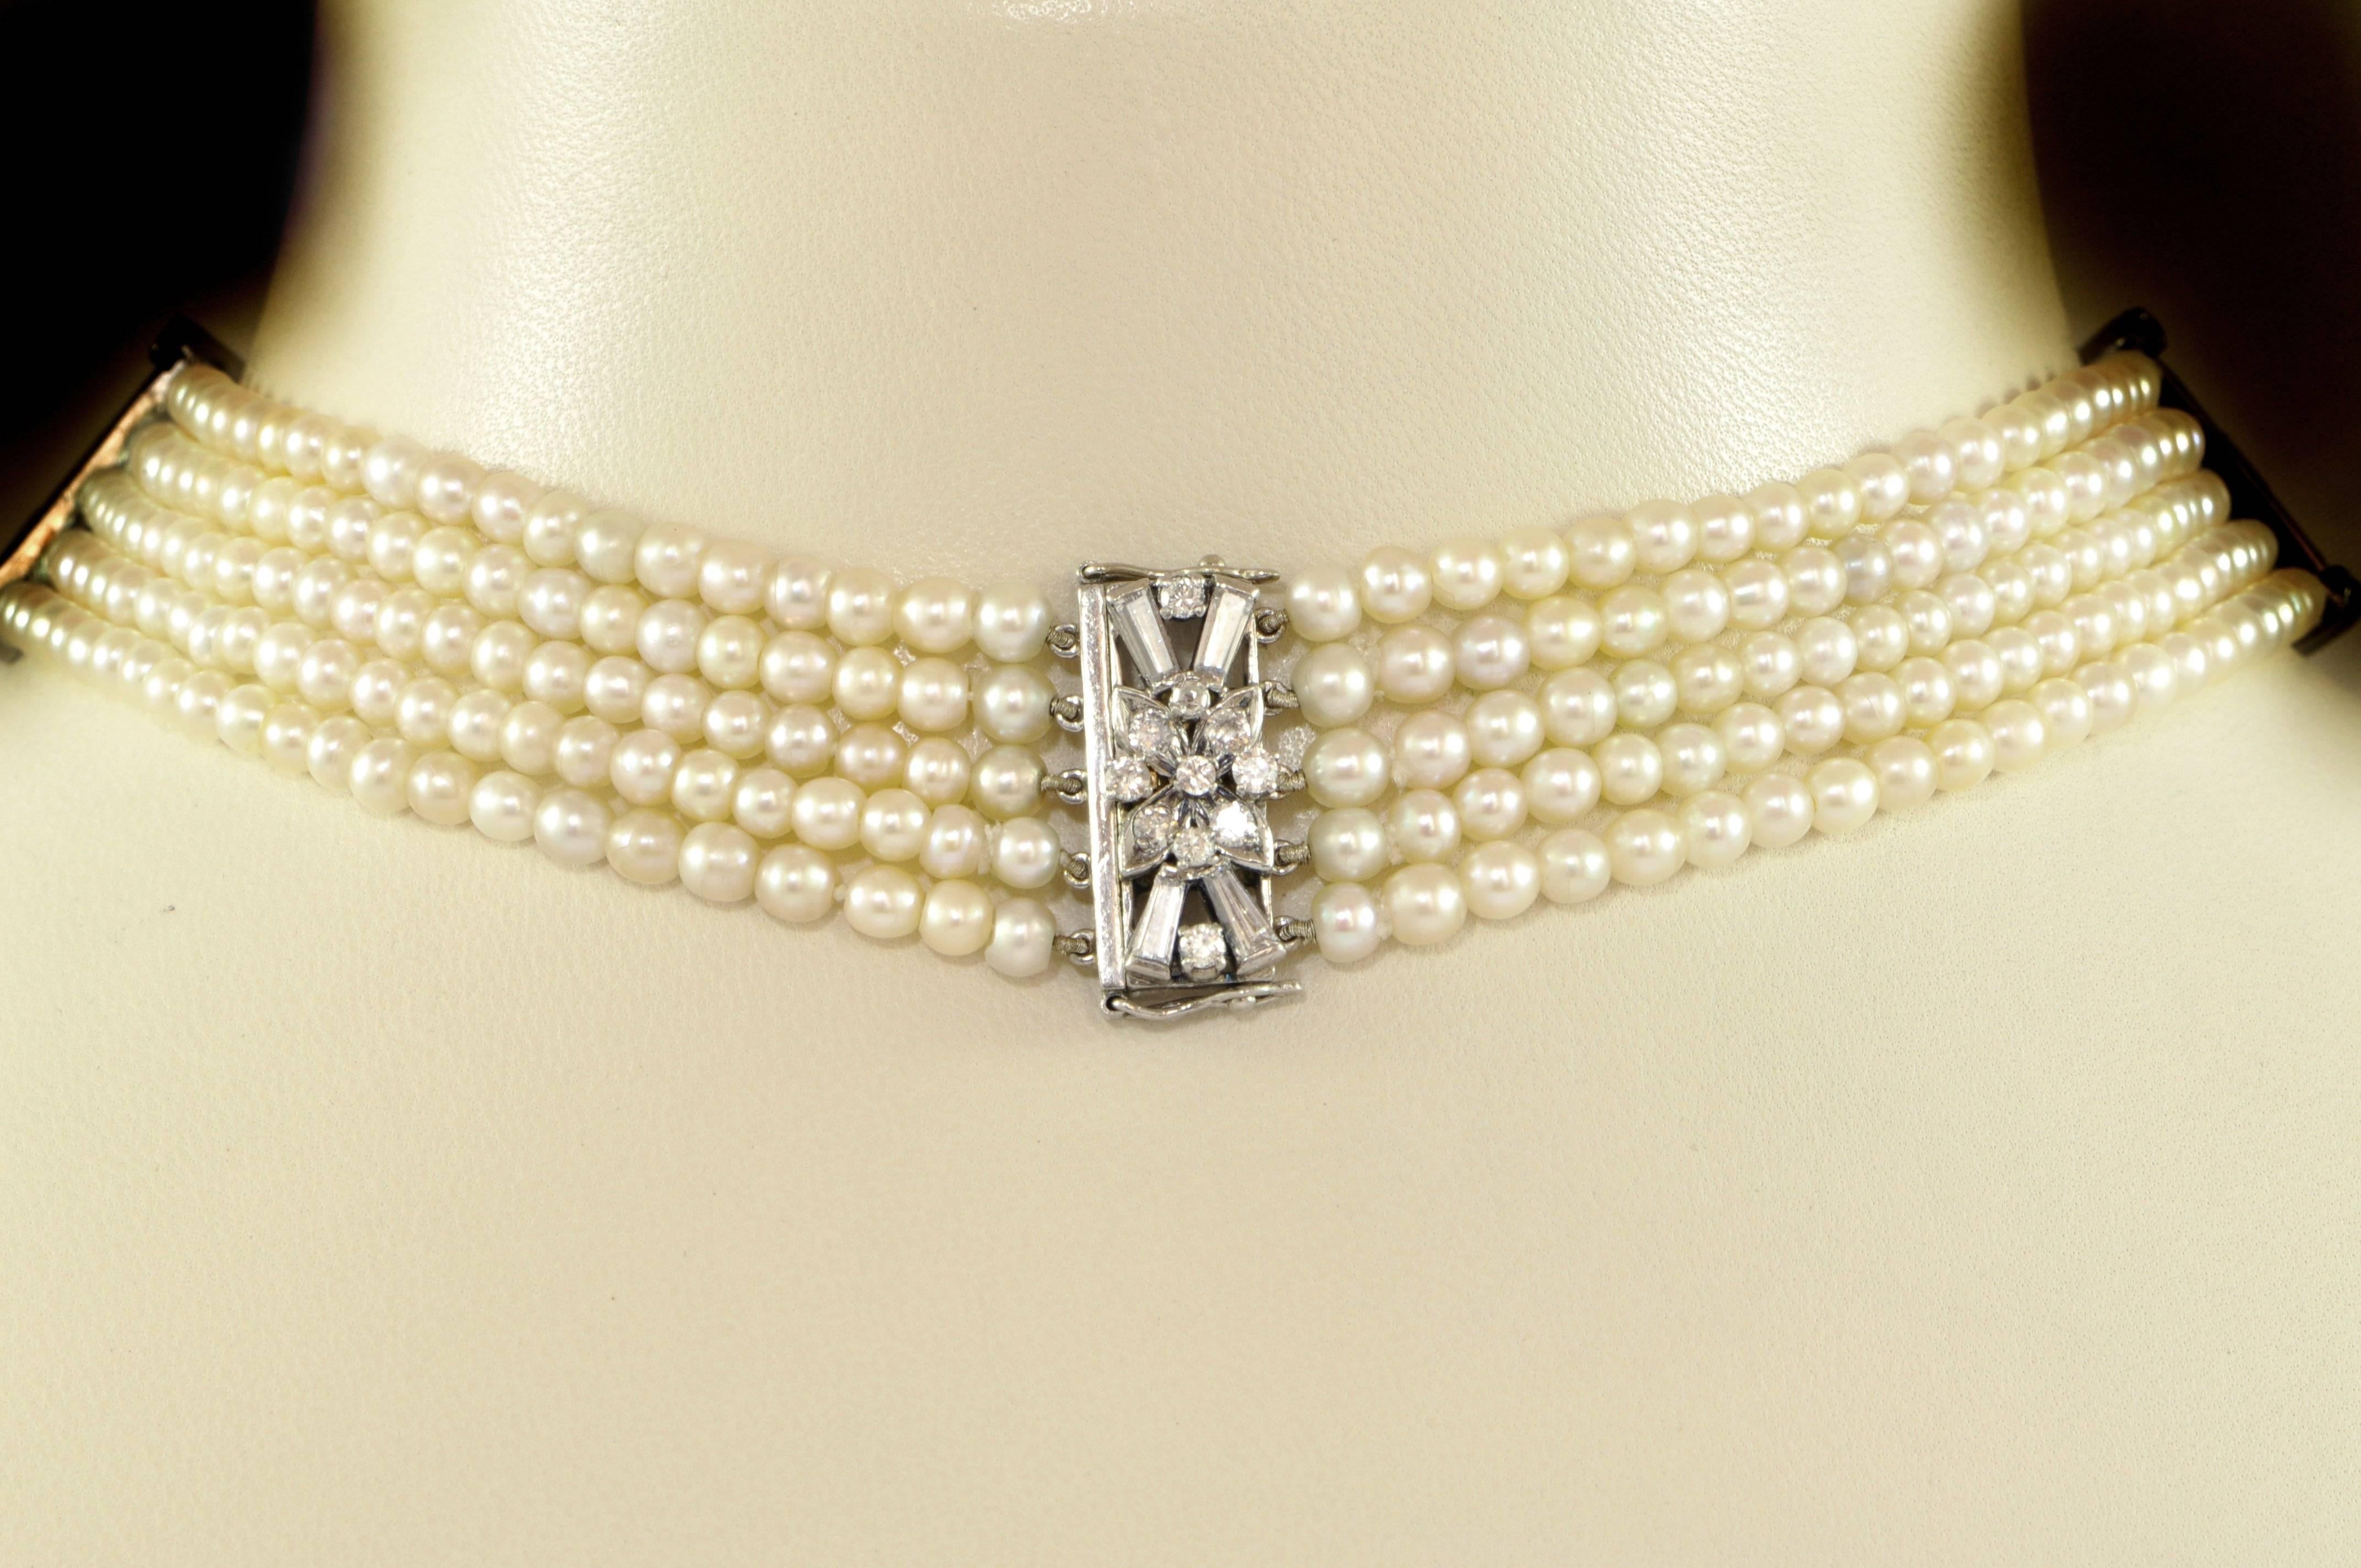 A five row pearl choker, with three diamond set spacer bars, set with three, channel set, baguette-cut diamonds and a claw set round brilliant-cut diamond at each end. With a diamond set clasp, with baguette and round brilliant-cut diamonds.